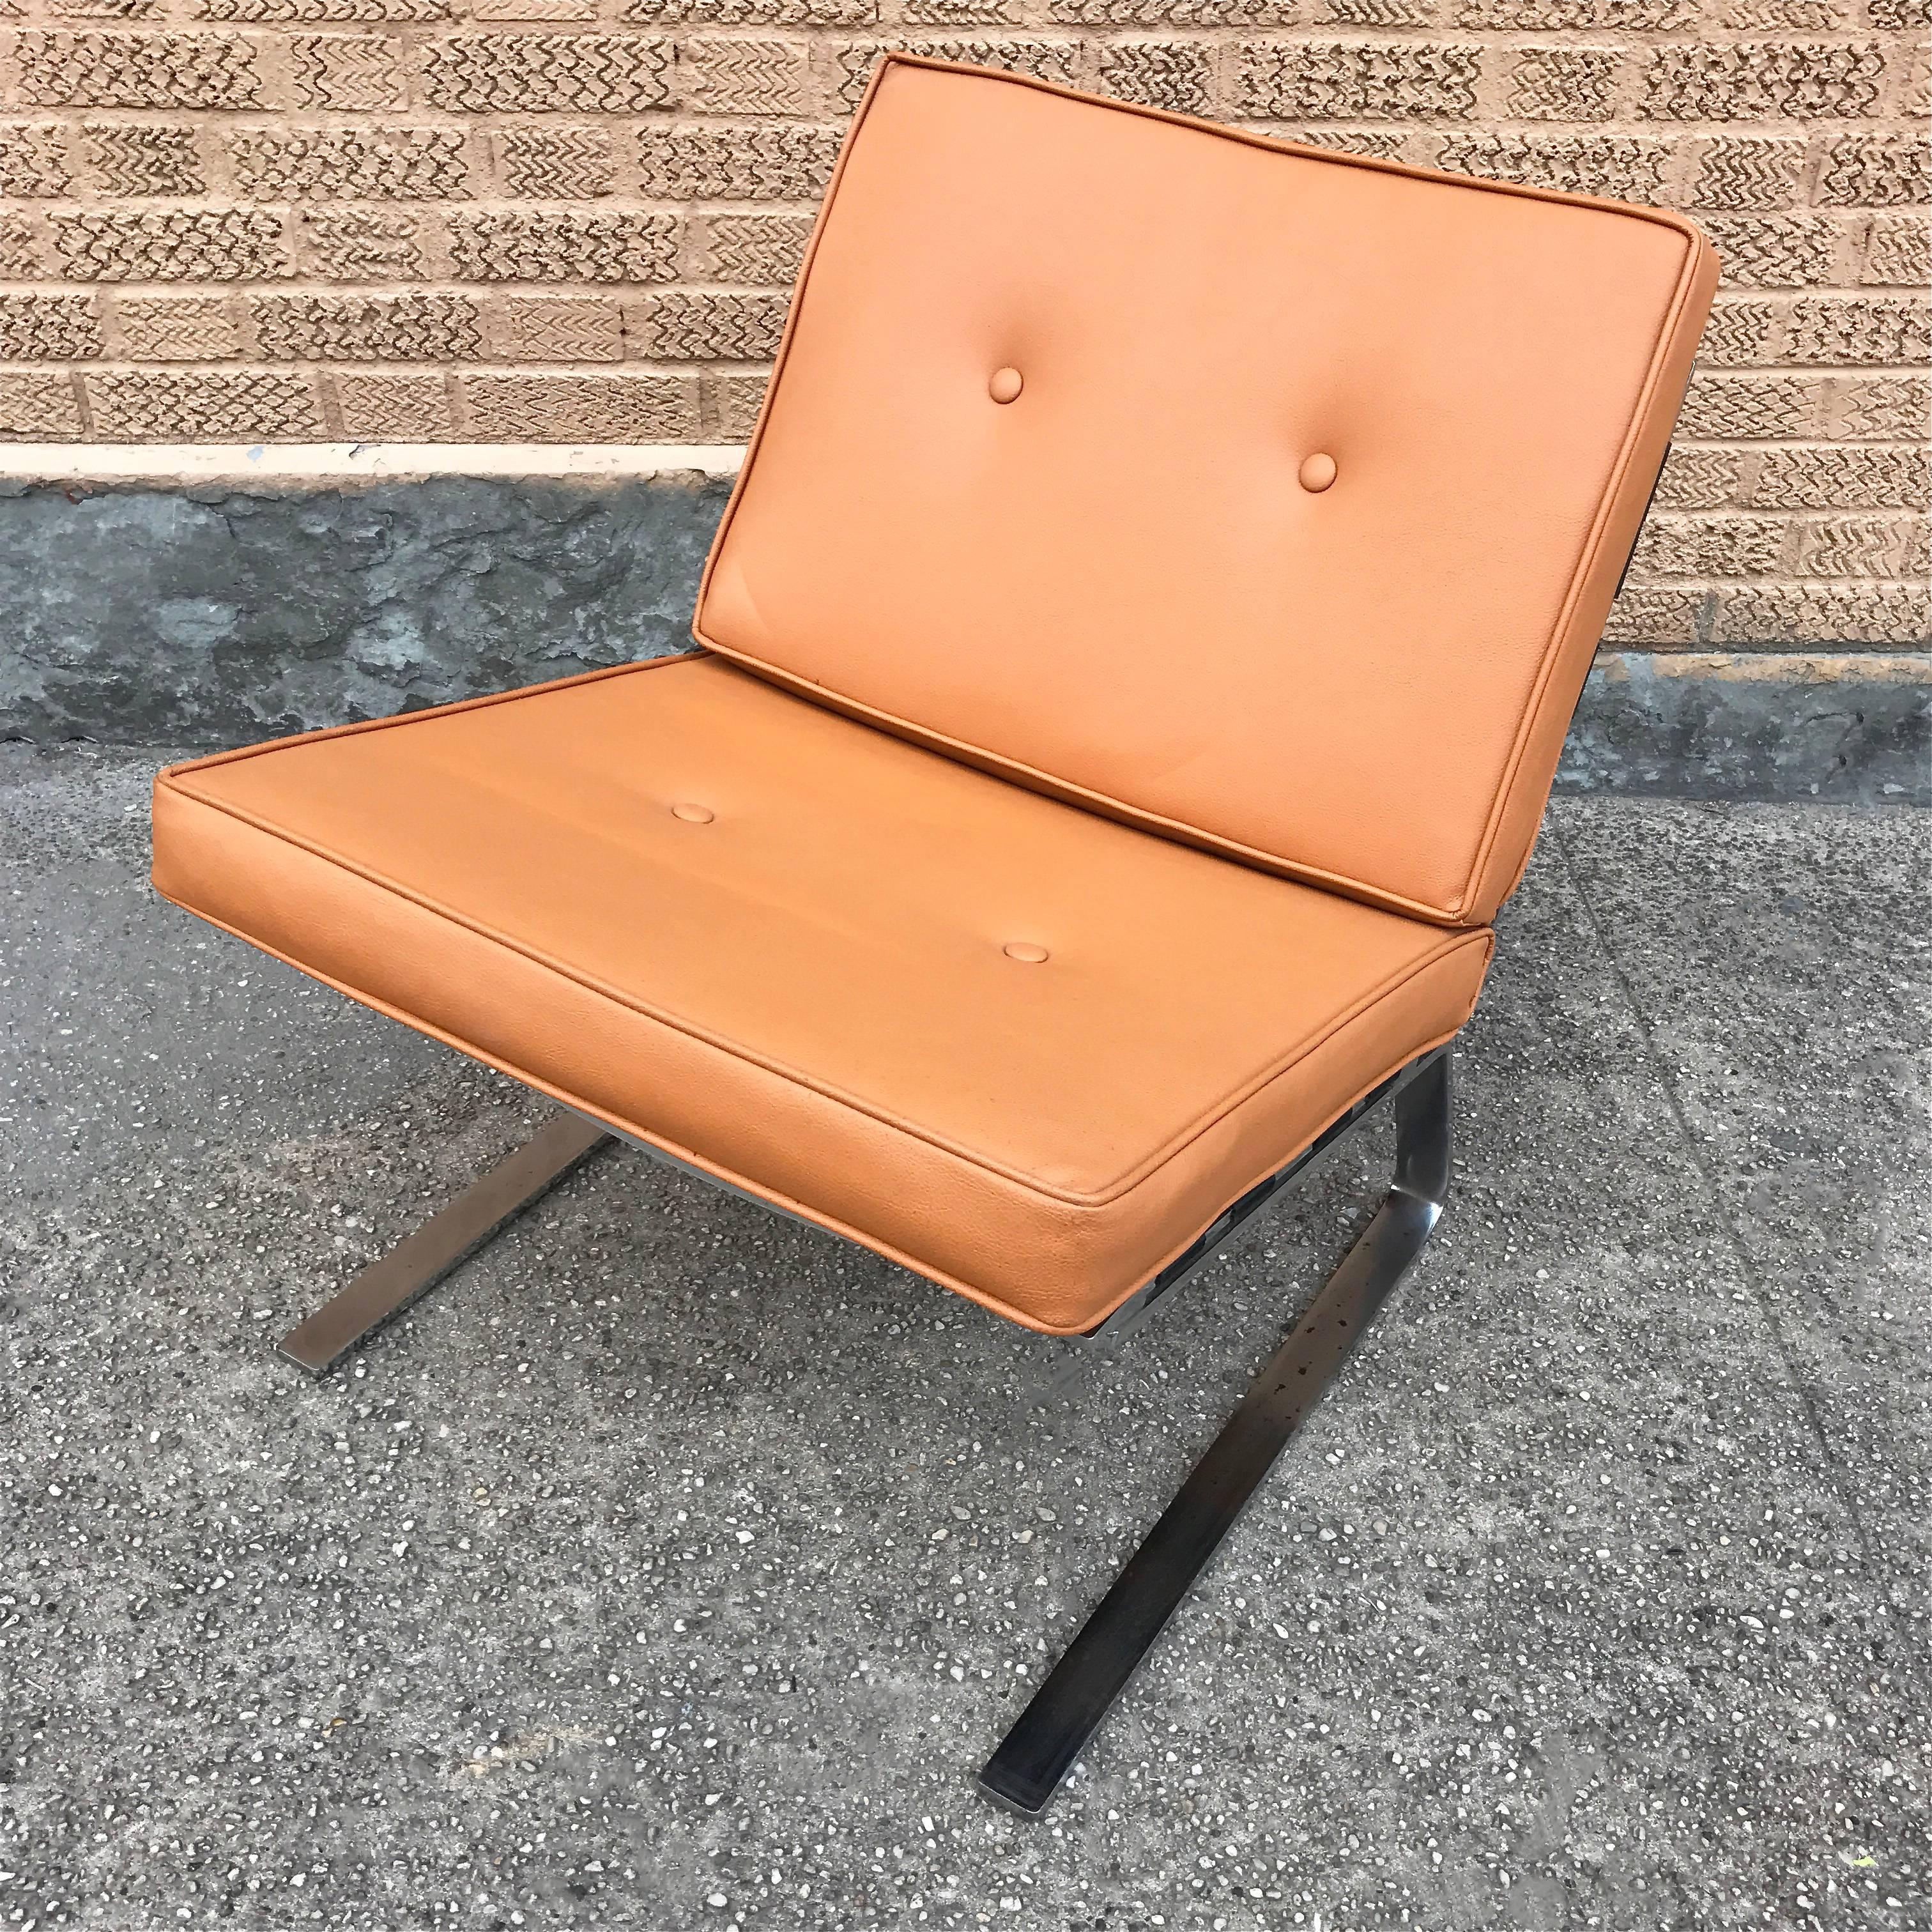 1970s, Mid-Century Modern, flat bar, chrome cantilever, airport style, lounge, slipper chair with vinyl upholstery in the manner of Paul Tuttle or Milo Baughman.